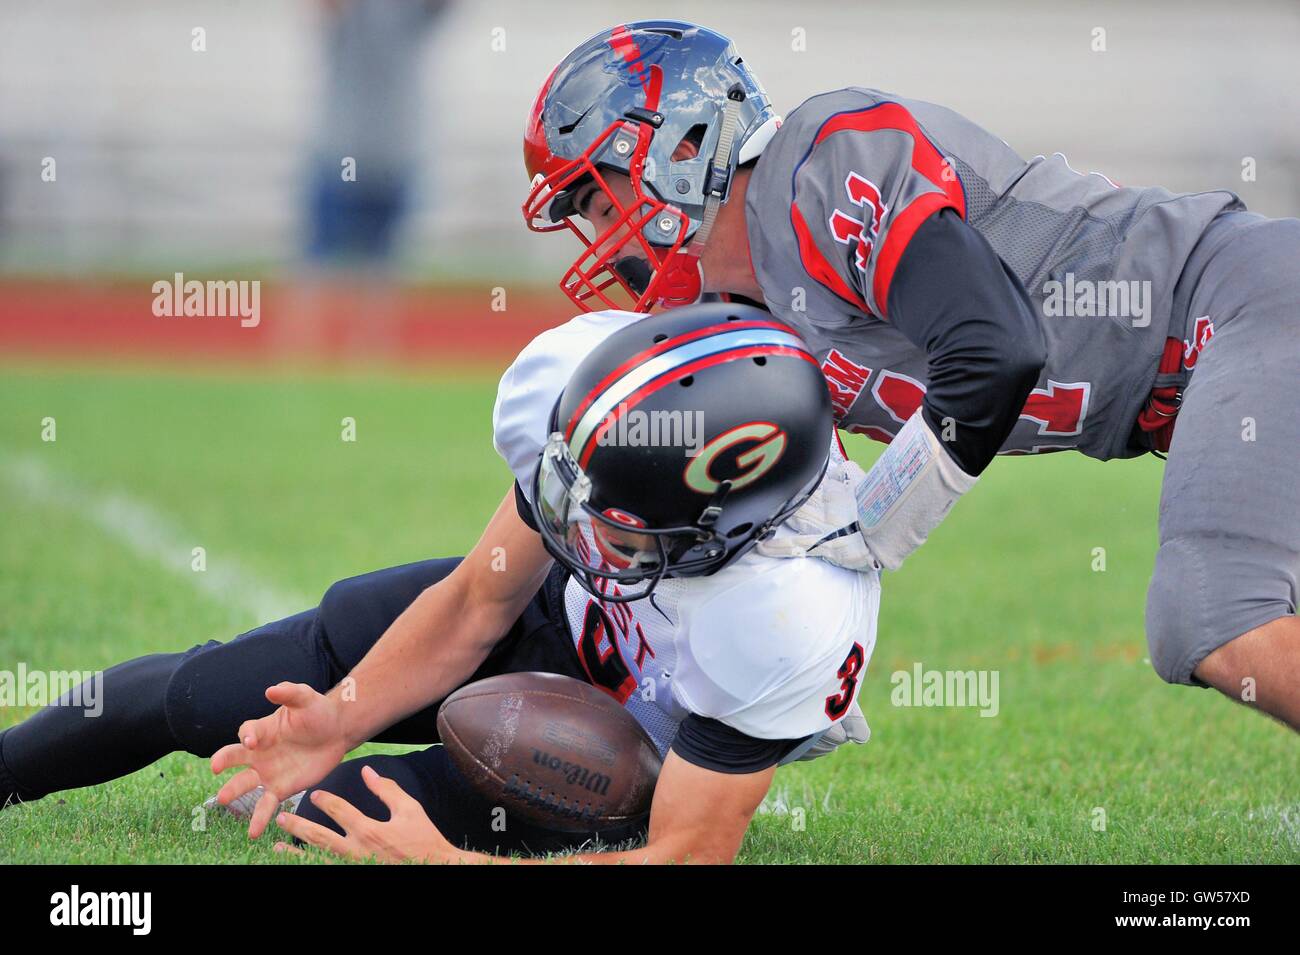 High school quarterback on a fumble while being pounced on by a defensive back who arrived too late to make the recovery. USA. Stock Photo